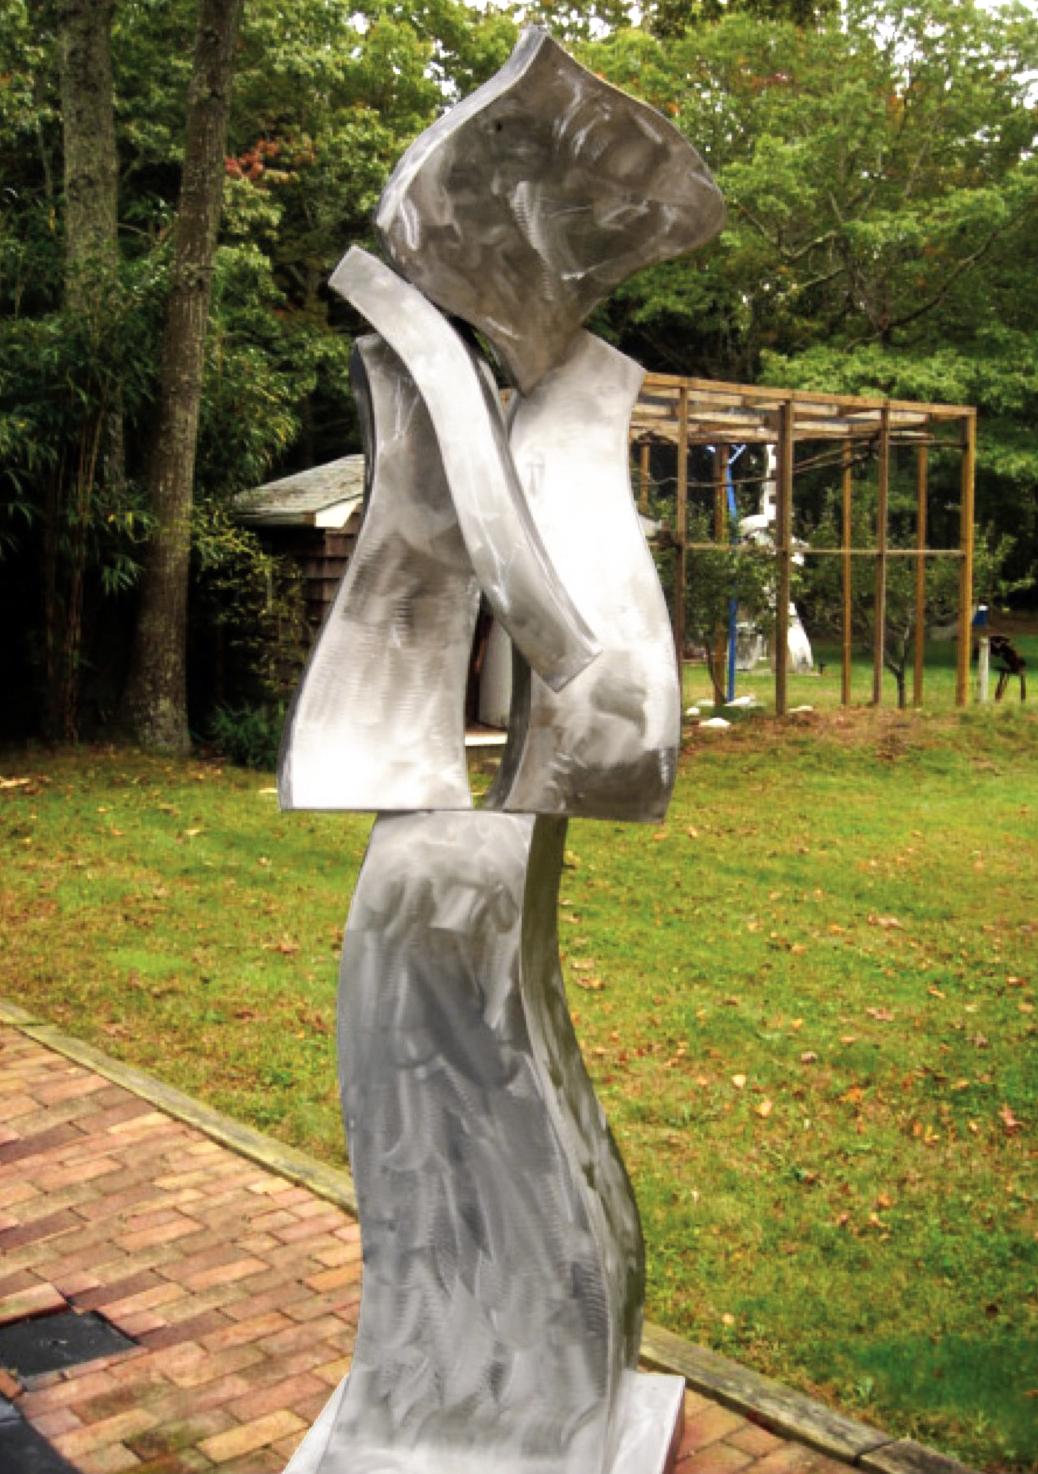 Hans Van de Bovenkamp Abstract Sculpture - "Muse #3" Abstract, Metal Sculpture, Large-Scale, Outdoors, Silver